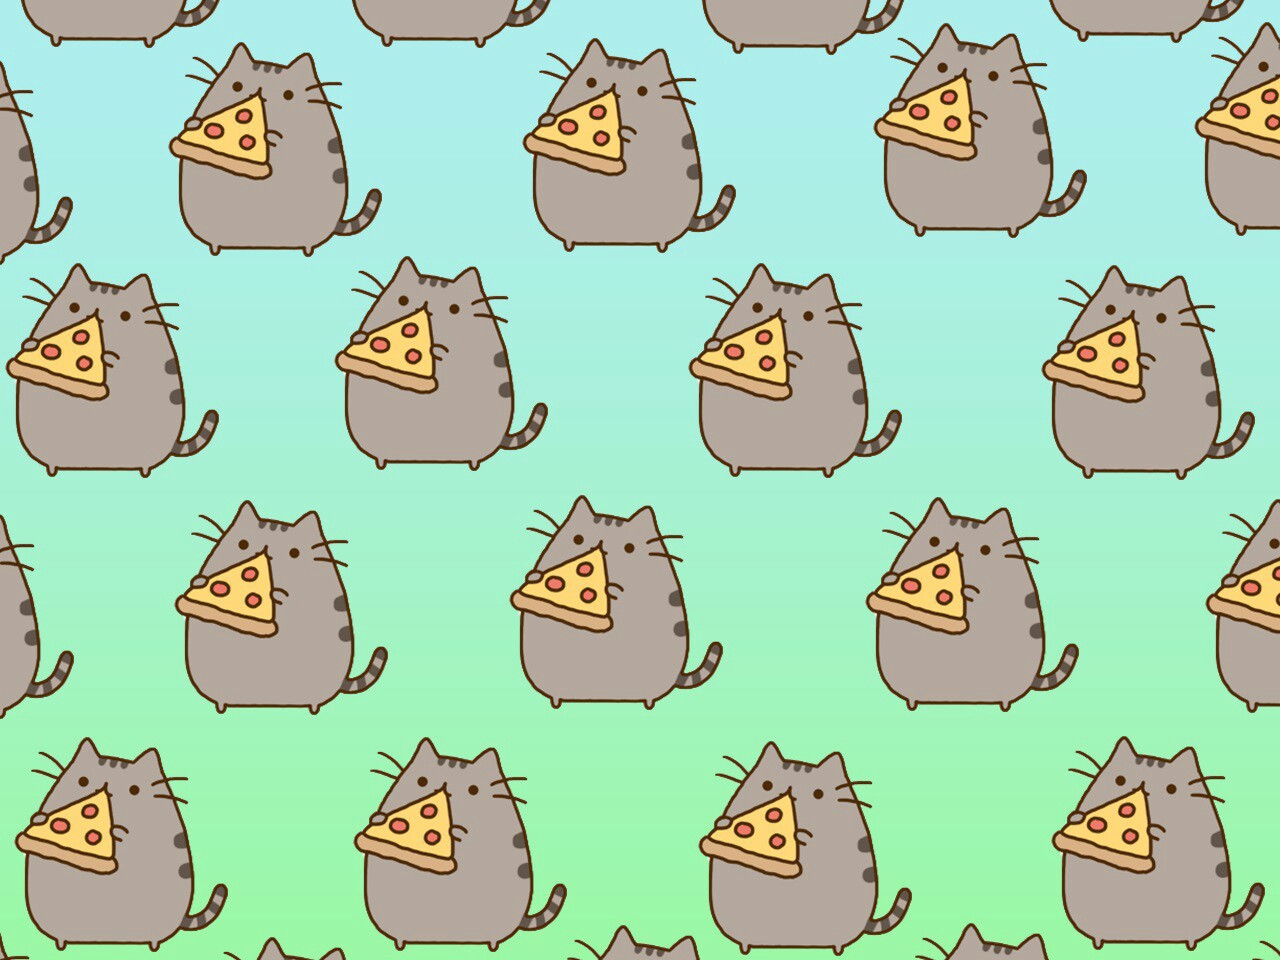 Pusheen 1 discovered by Jnxx.